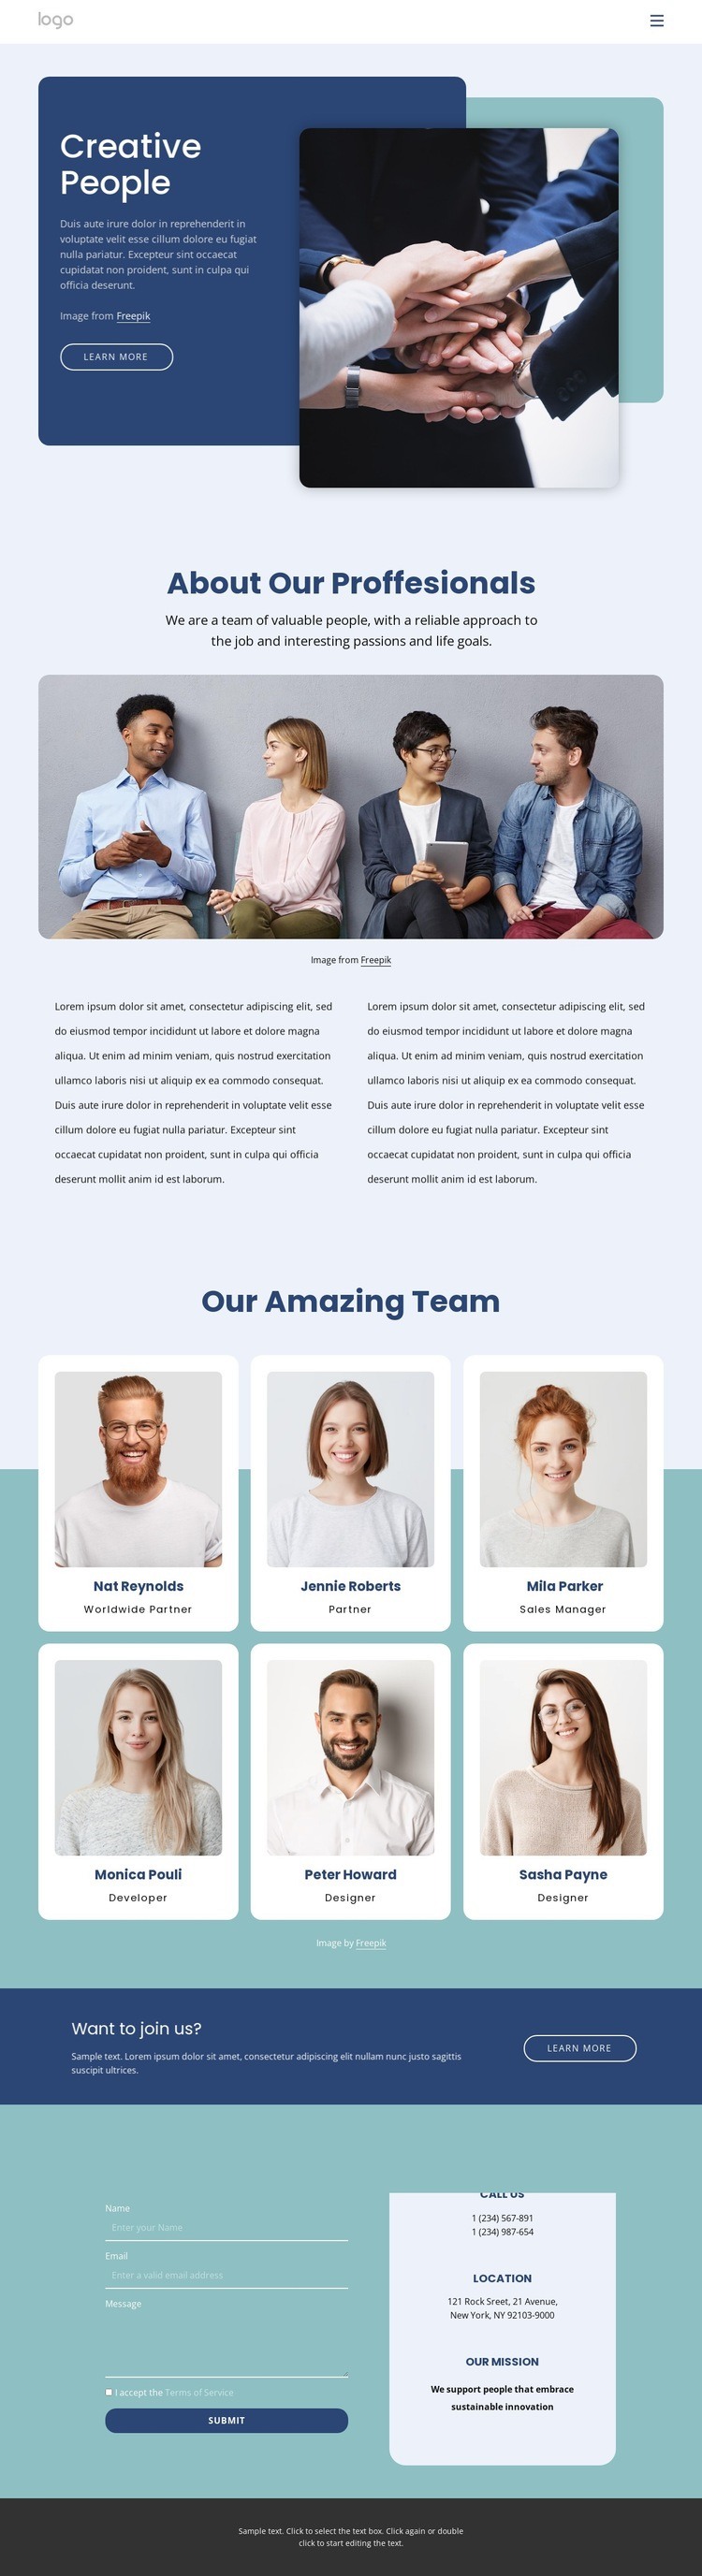 We want you to grow with us Webflow Template Alternative